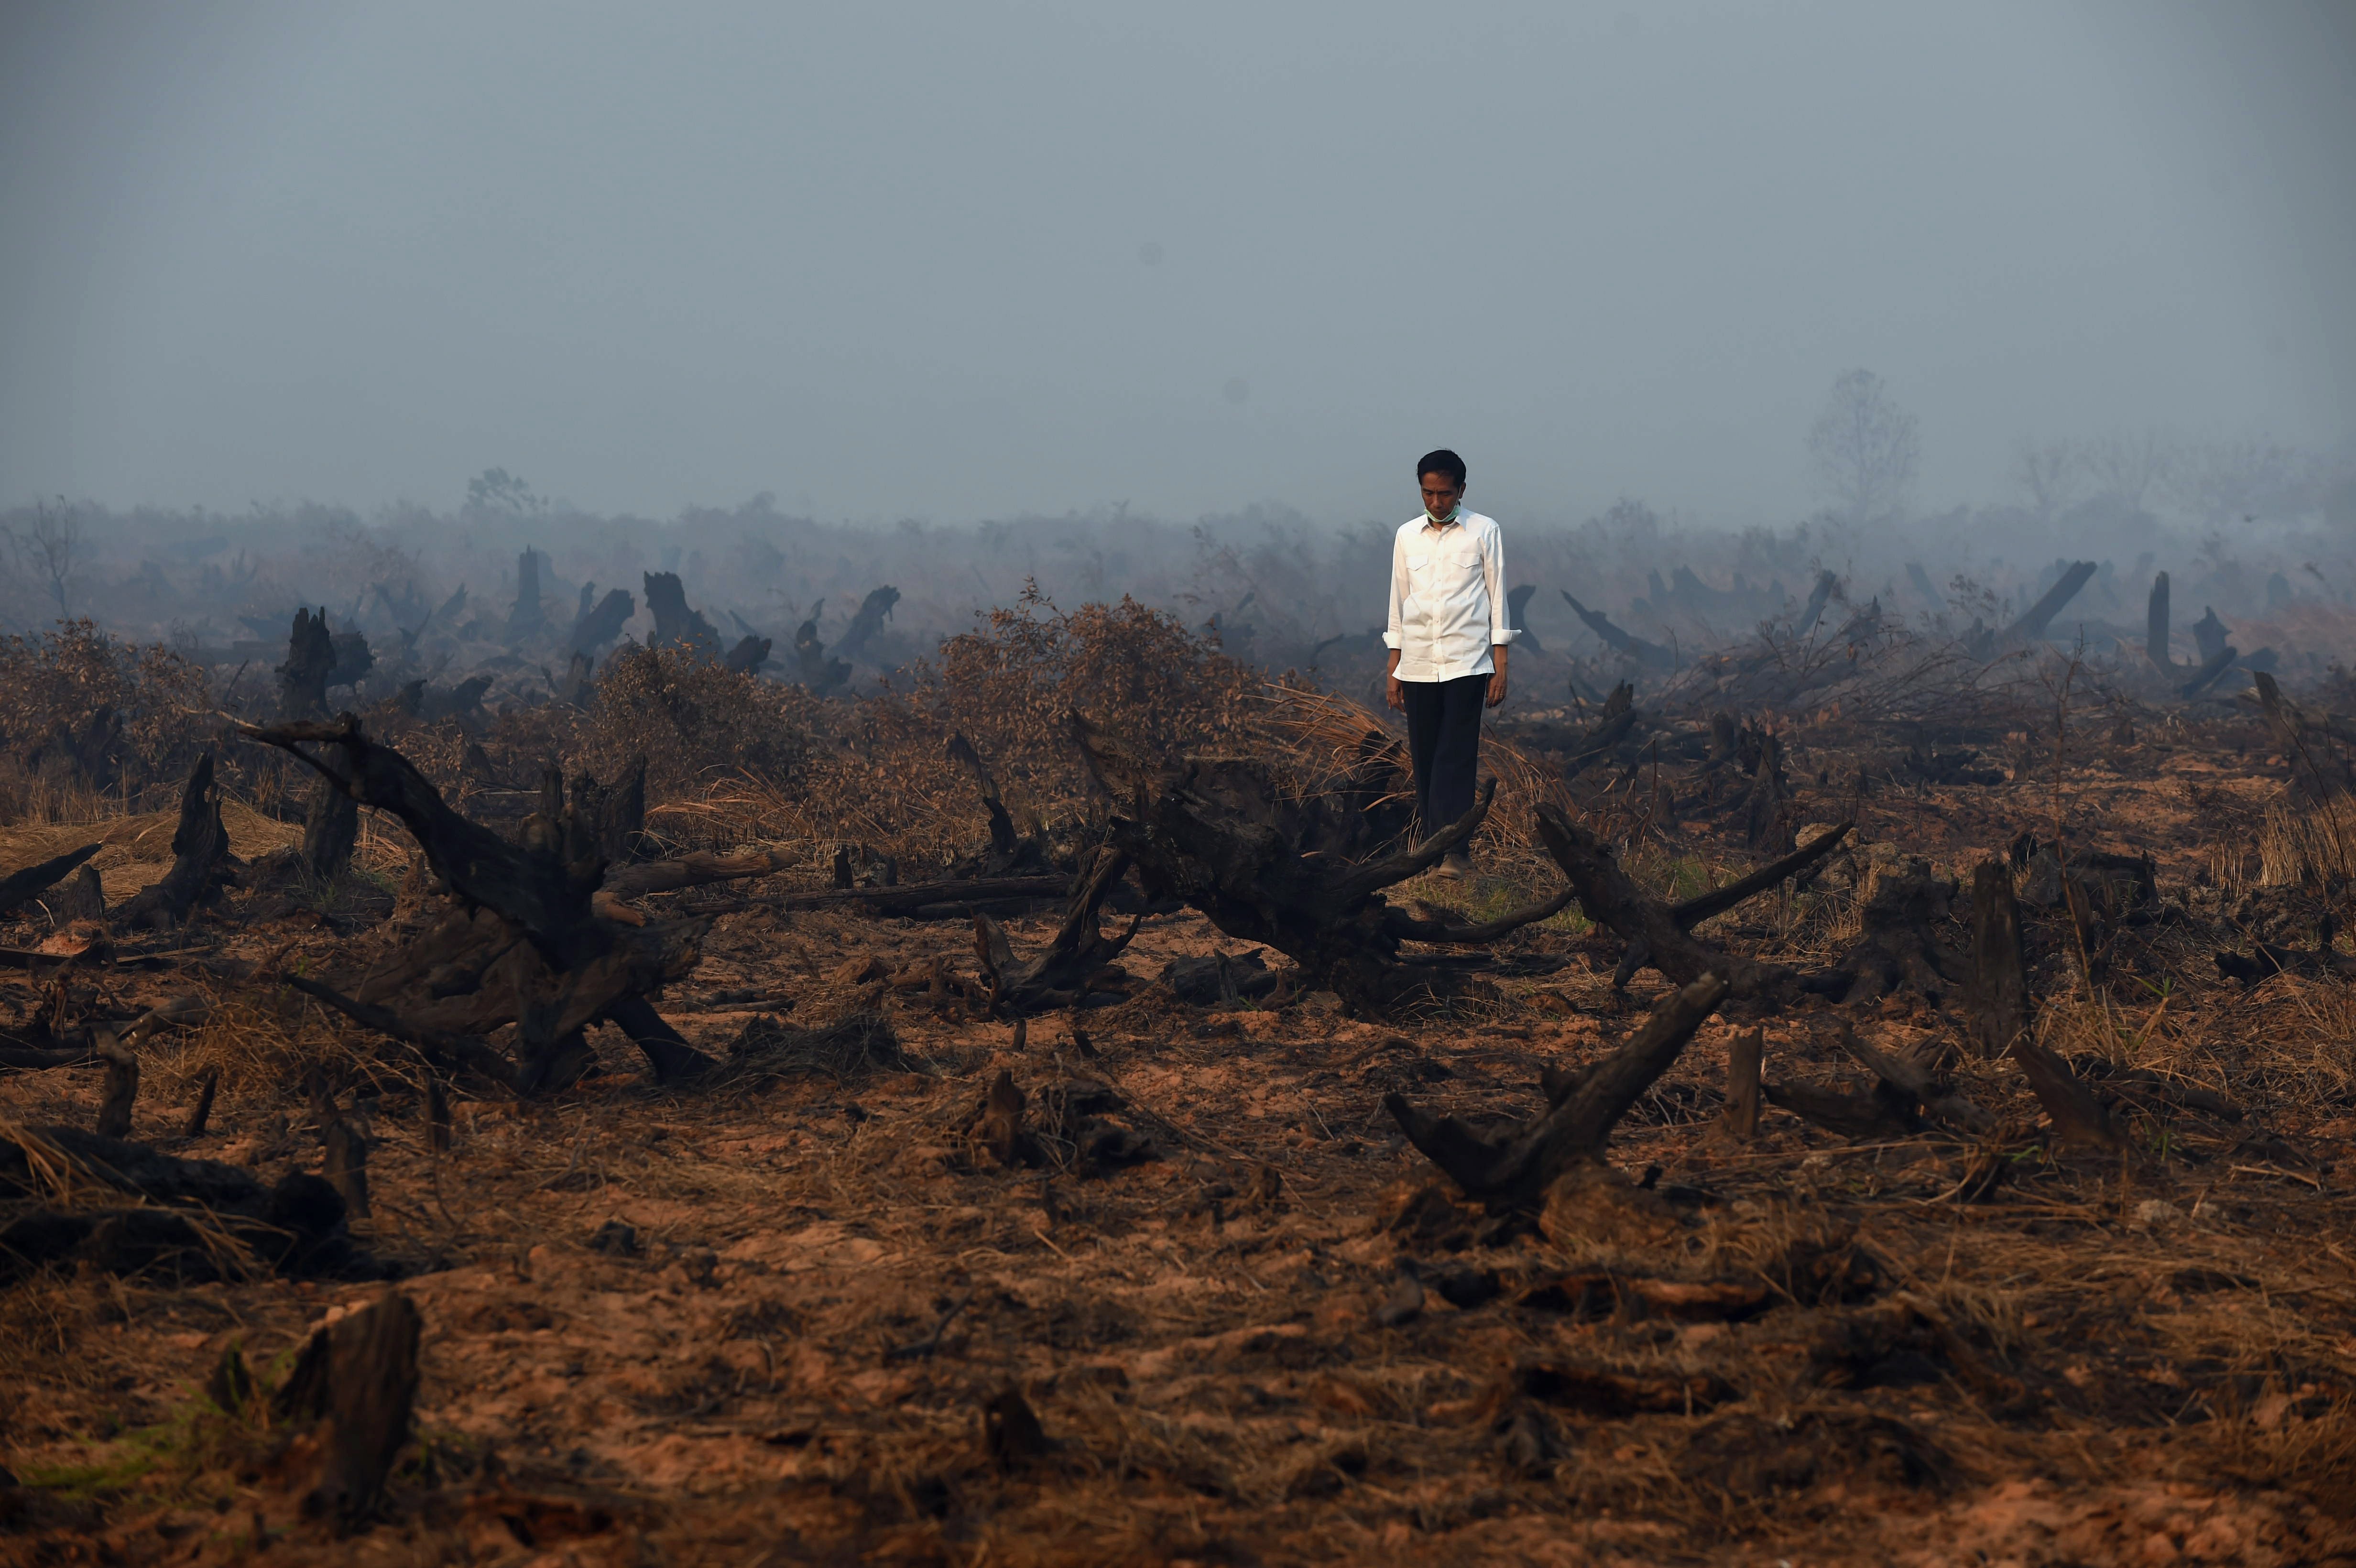 Indonesian President Joko Widodo inspects a peatland clearing that was engulfed by fire in southern Kalimantan in September 2015. Such fires, often started to clear forest for plantations, are the cause of seasonal haze in the region, a recurring problem for Indonesia and its neighbouring countries. To meet its new targets on carbon emission reduction, Indonesia must fully enforce forest protection laws. Photo: AFP